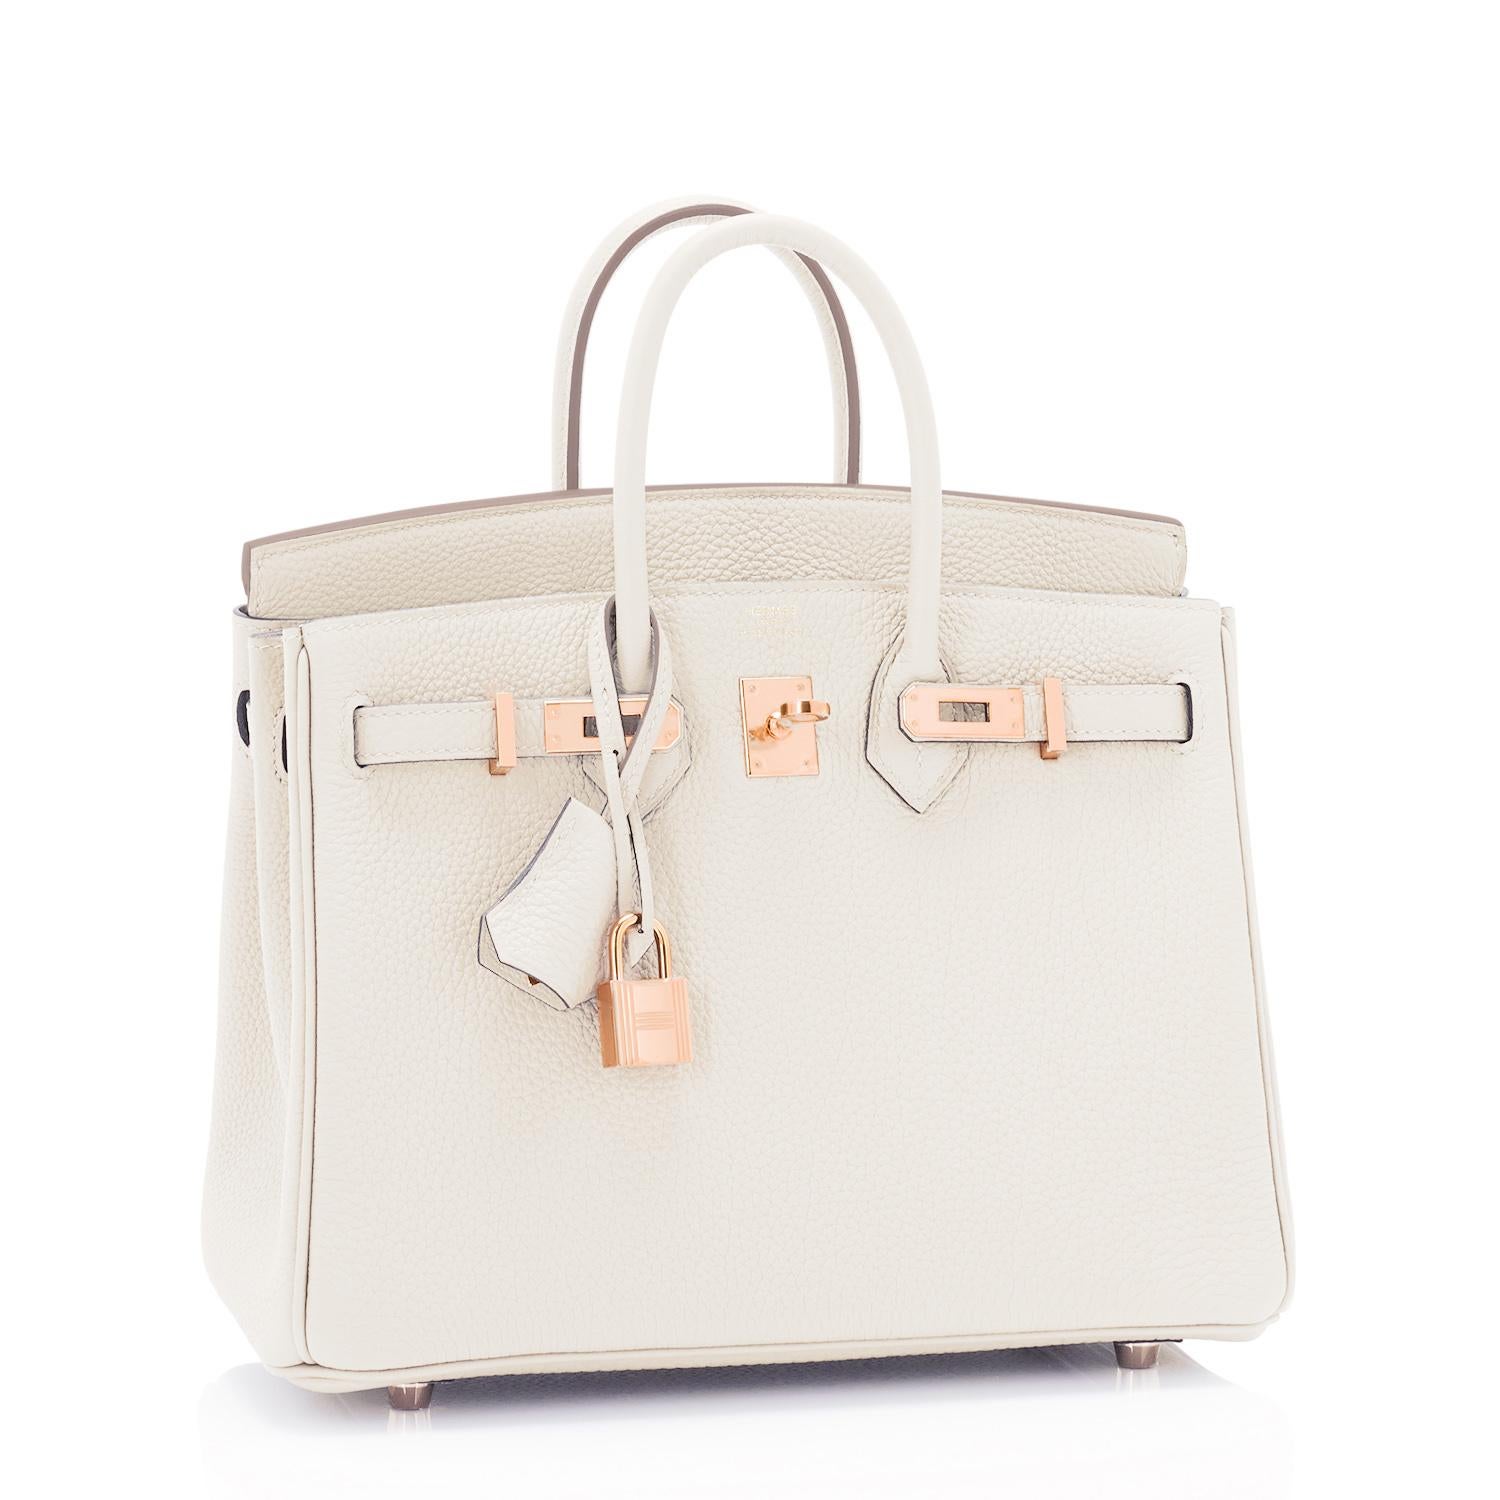 Hermes Birkin 25cm Craie Rose Gold Hardware Togo Off White Z Stamp, 2021
Don't miss this most coveted Craie with Rose Gold Baby Birkin! It is sooo pretty in person!
Brand New in Box.  Store Fresh. Pristine Condition (with plastic on hardware)
Just